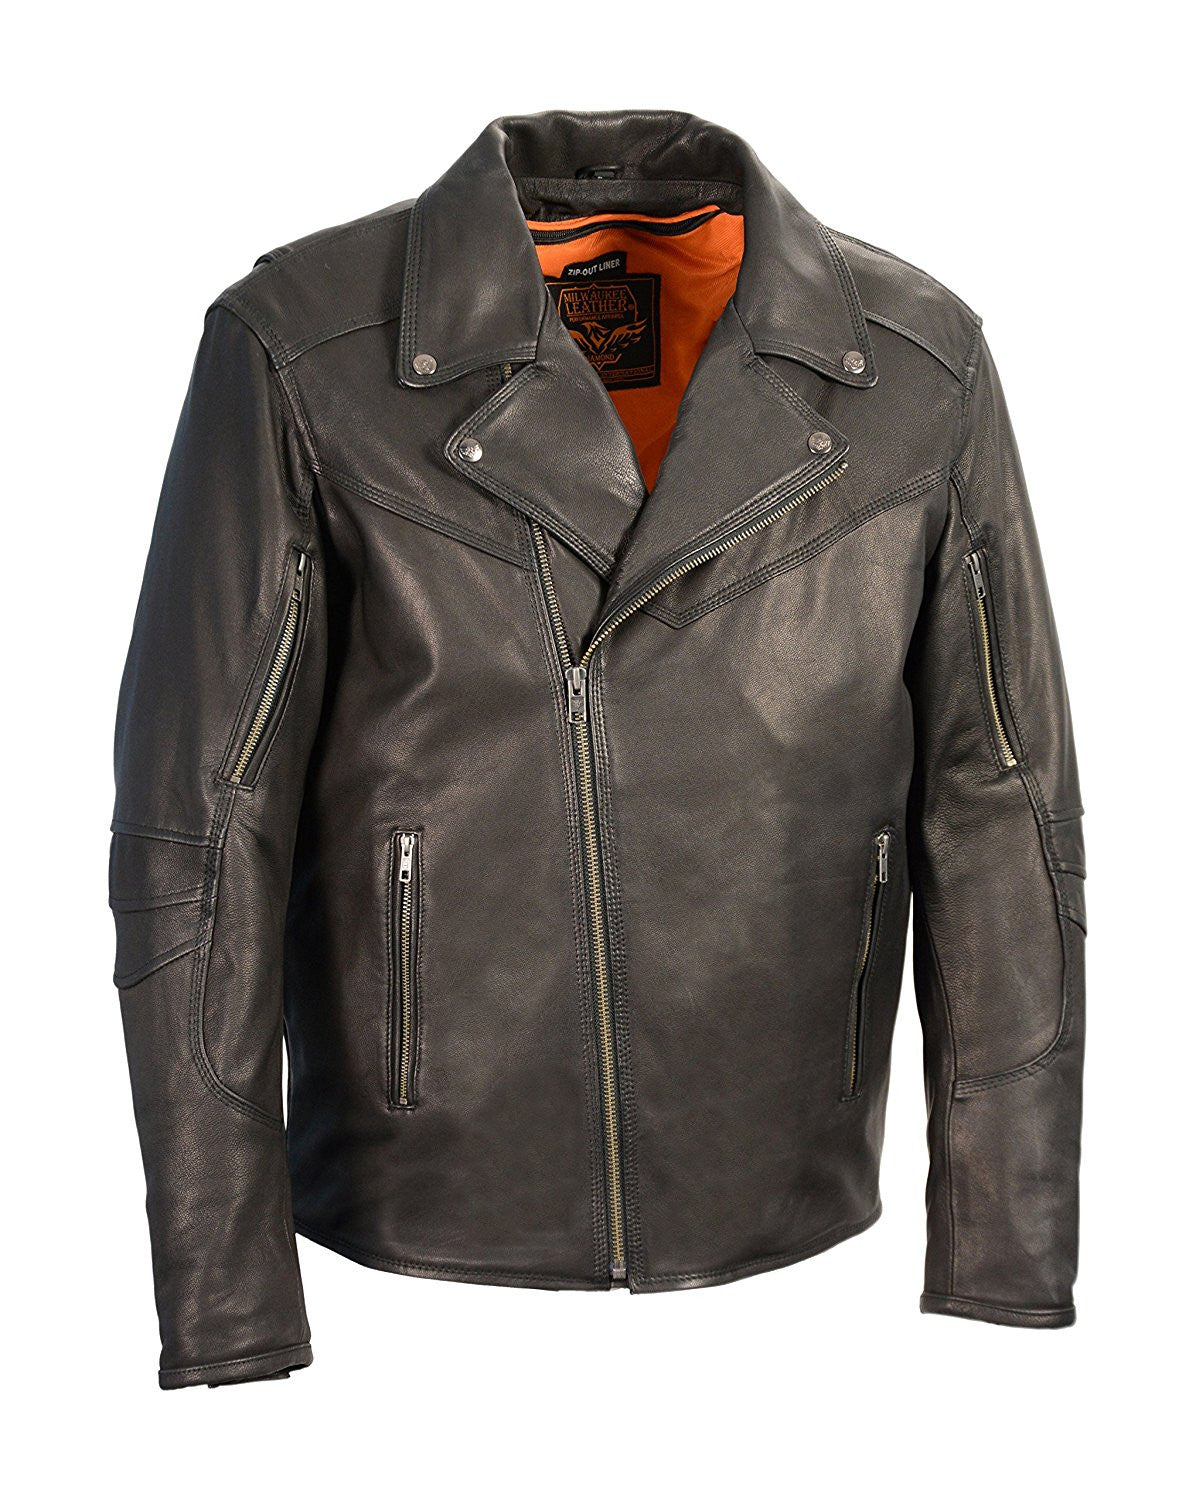 Milwaukee Leather Men's Vented Updated Motorcycle Jacket | Maine-Line ...